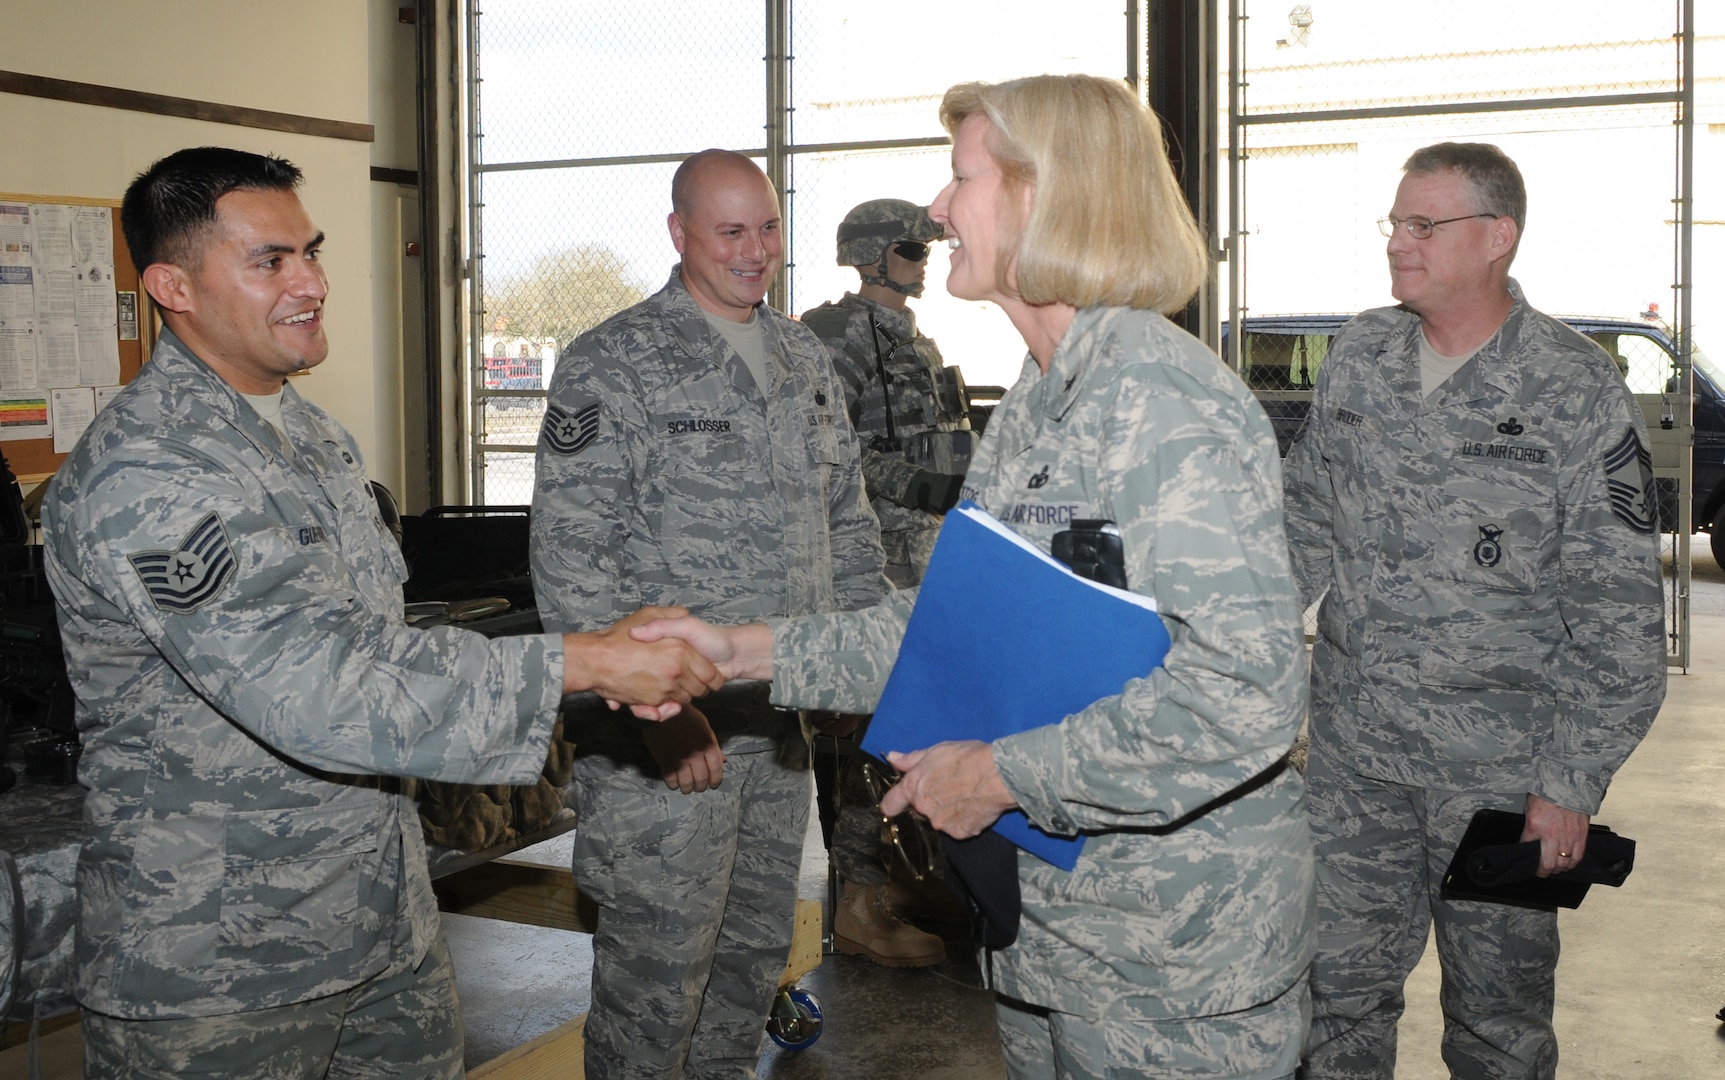 Brig. Gen. Mary Kay Hertog (second from right), Air Force security forces director, shakes hands with Tech. Sgt. Hugo Guerrero, 12th Security Forces Squadron, during a visit to Randolph Air Force Base Feb. 9. General Hertog and Chief Master Sgt. Bruce Broder (right), the security forces career-field manager, toured the squadron and discussed the general's vision with fellow security forces members before heading out to learn about the 12th SFS military working dog and combat arms flights. (U.S. Air Force photo by Rich McFadden)